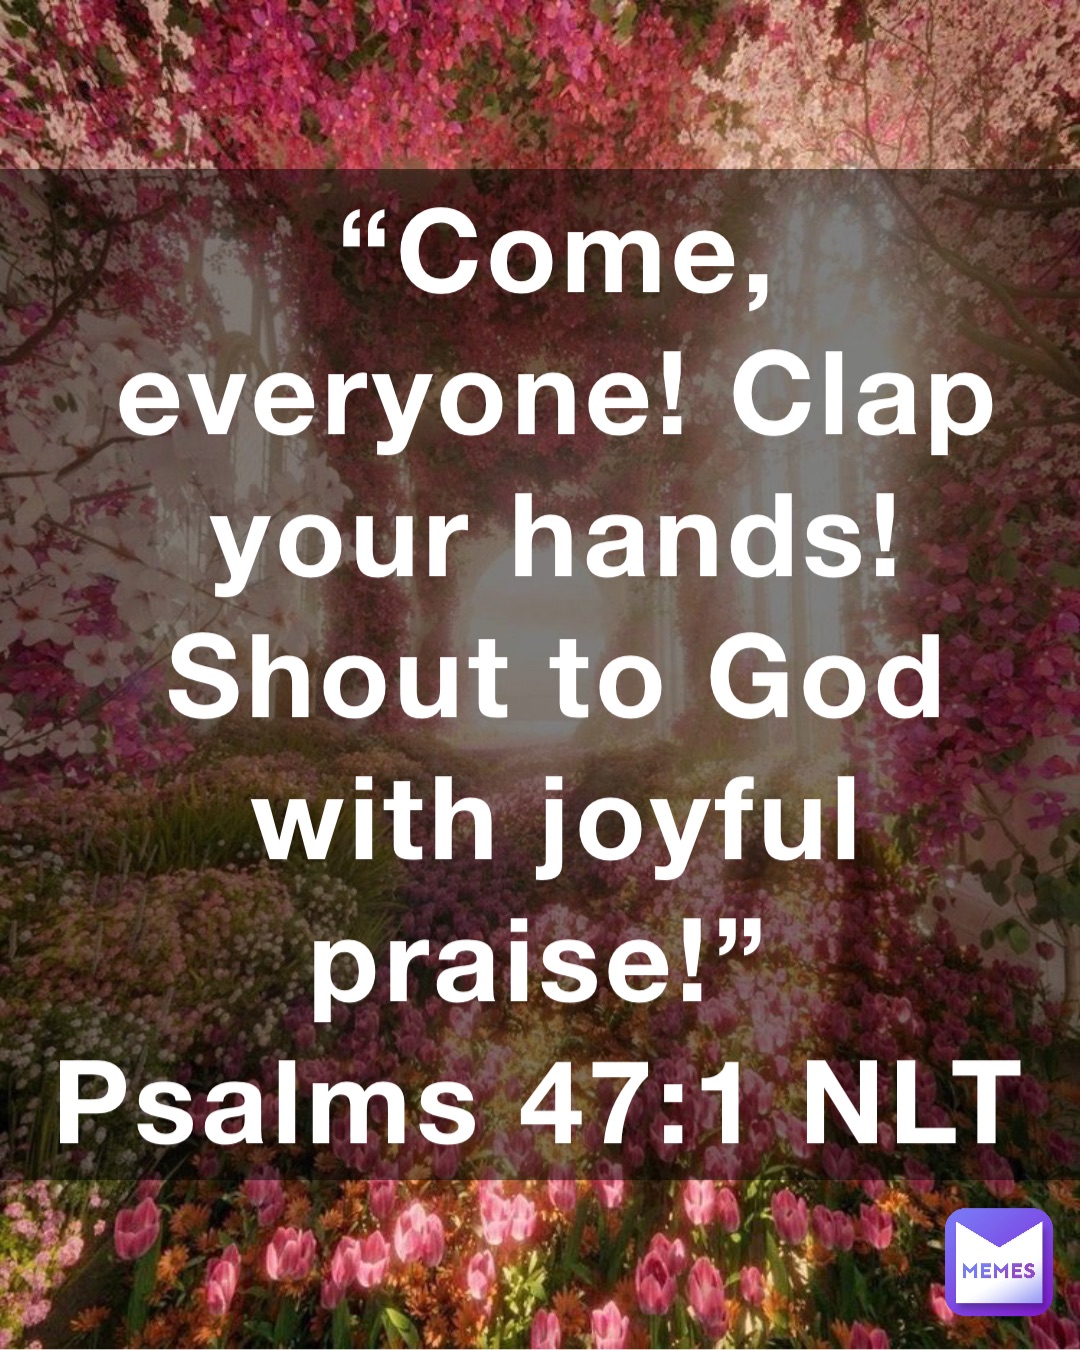 “Come, everyone! Clap your hands! Shout to God with joyful praise!”
‭‭Psalms‬ ‭47:1‬ ‭NLT‬‬